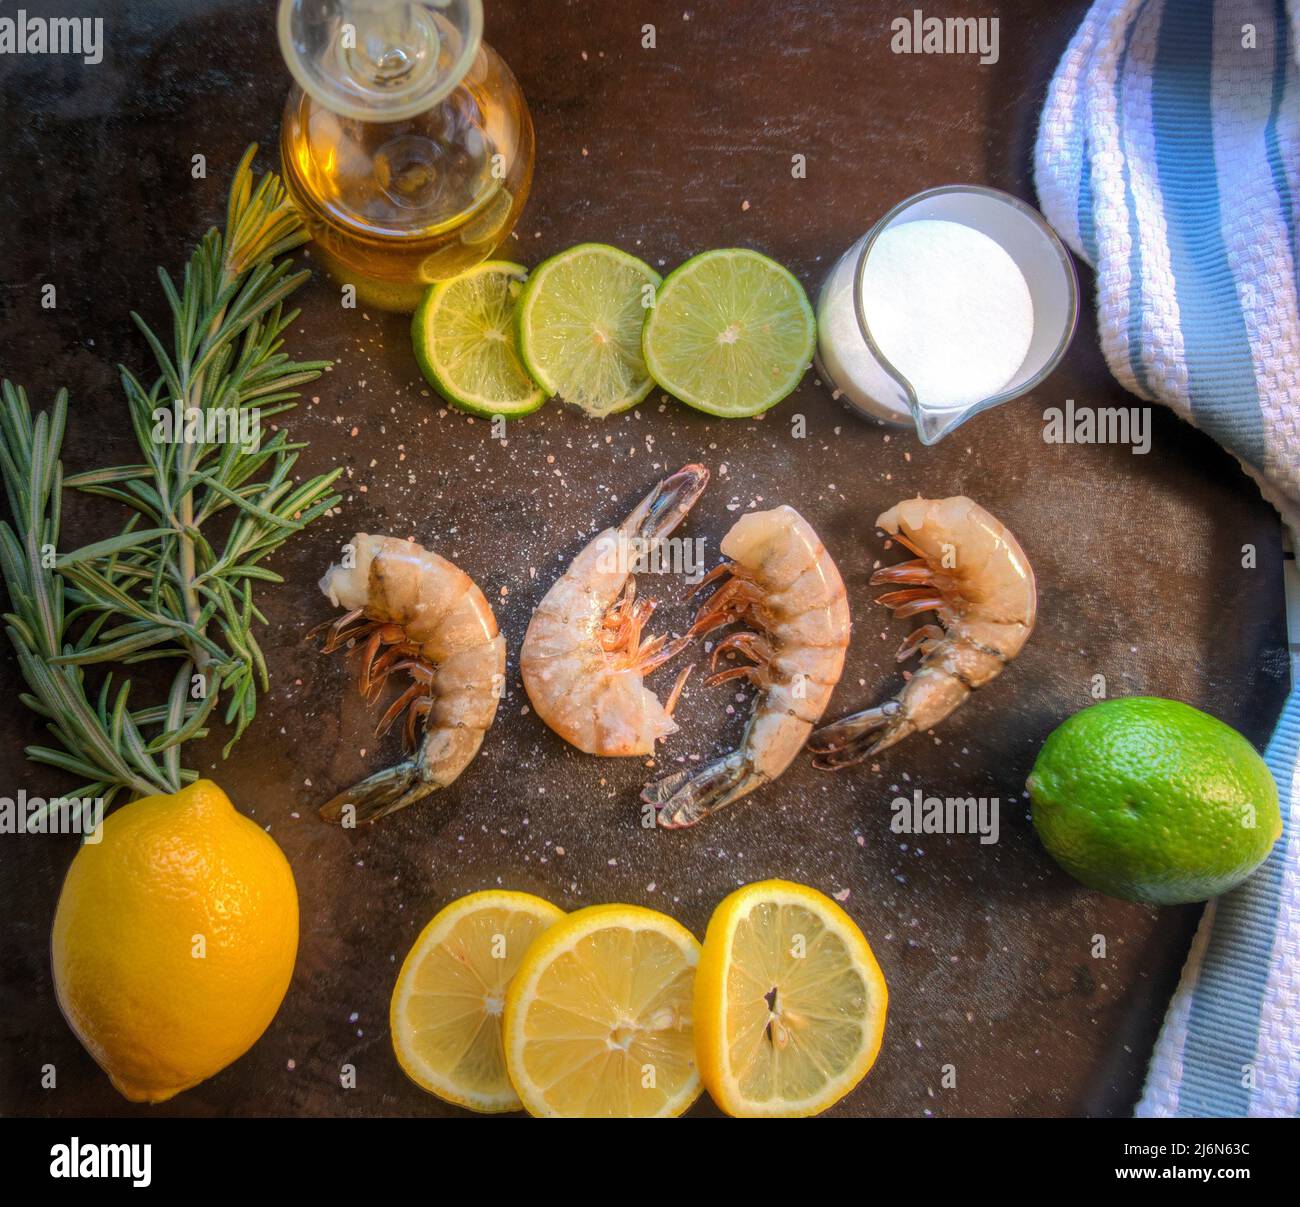 Top view of raw Gulf Shrimp on metal surface with limes, lemons and olive oil. Stock Photo